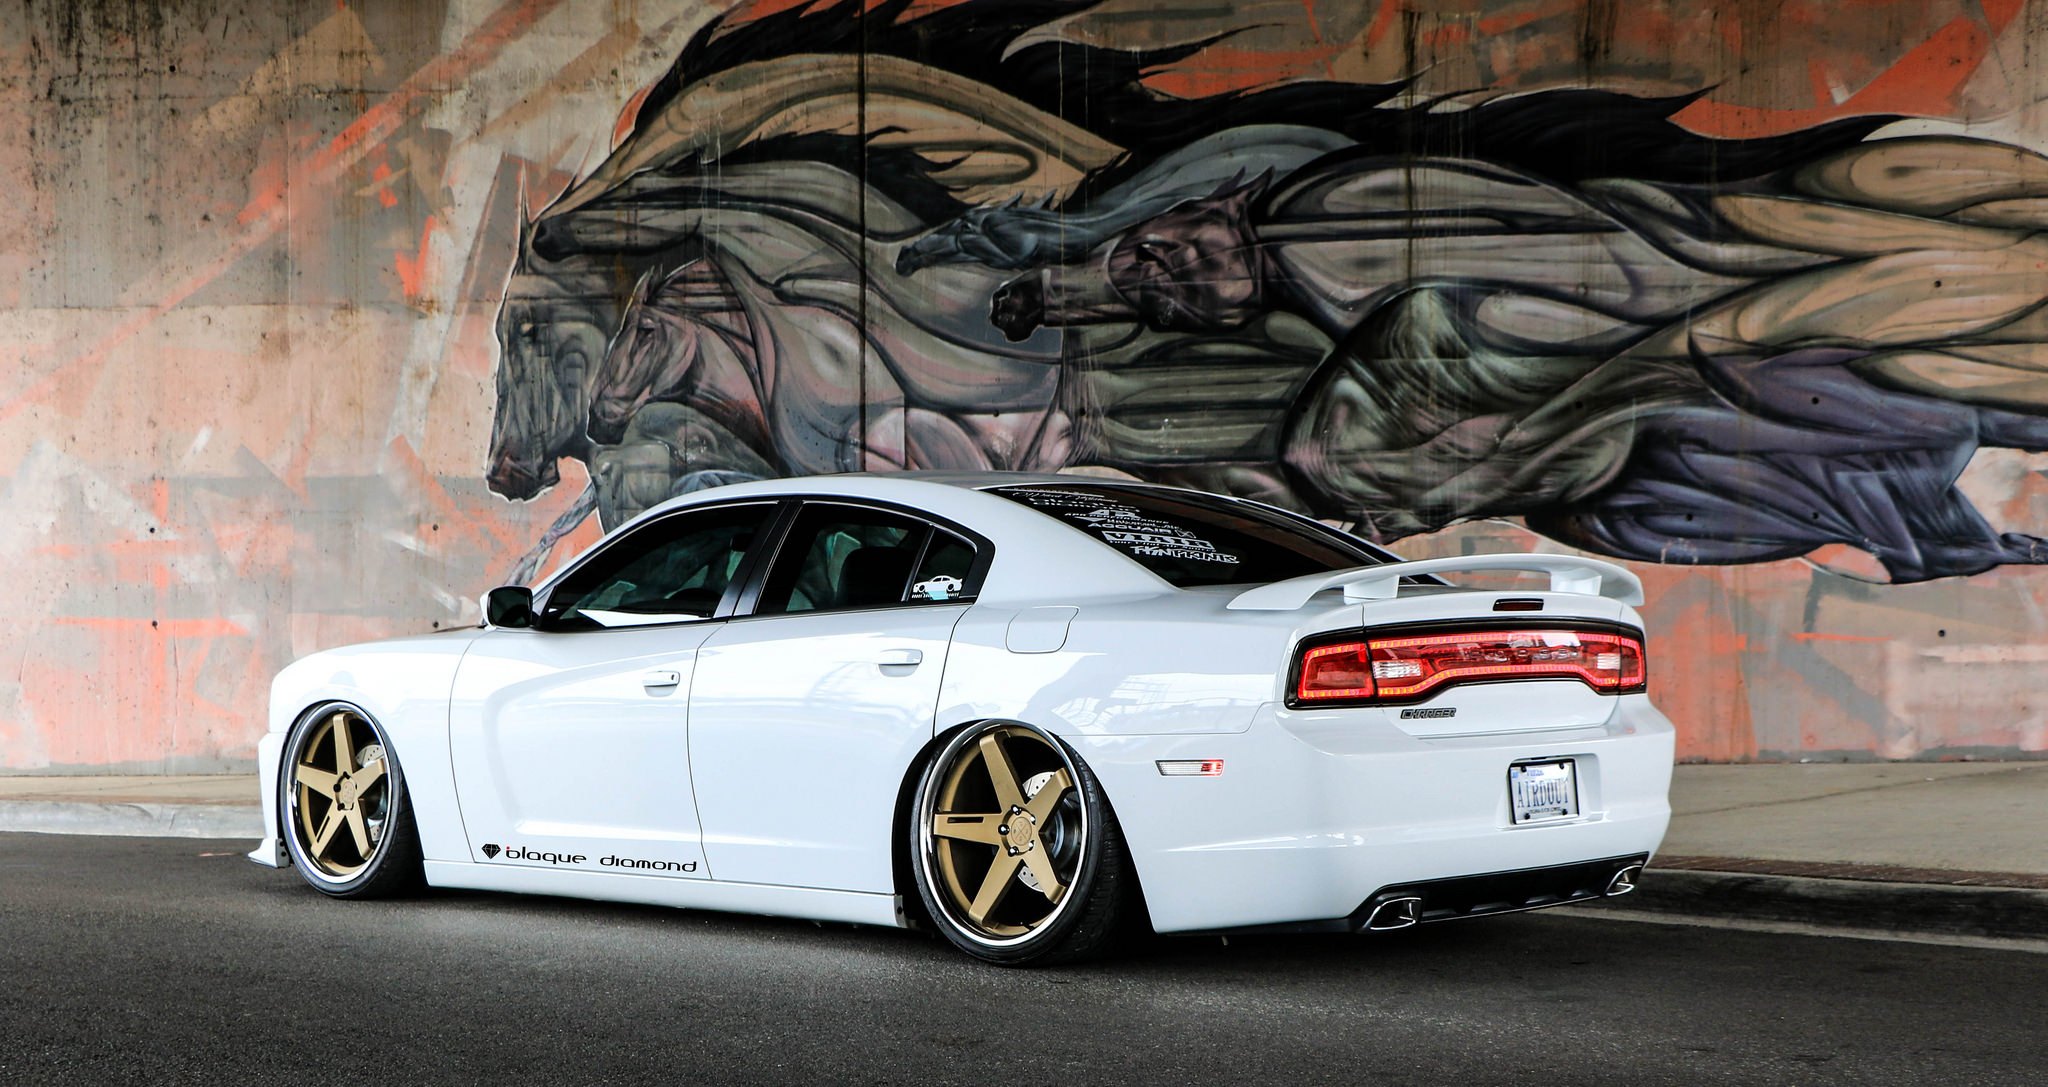 Stanced Dodge Charger in White - Photo by Black Diamond.